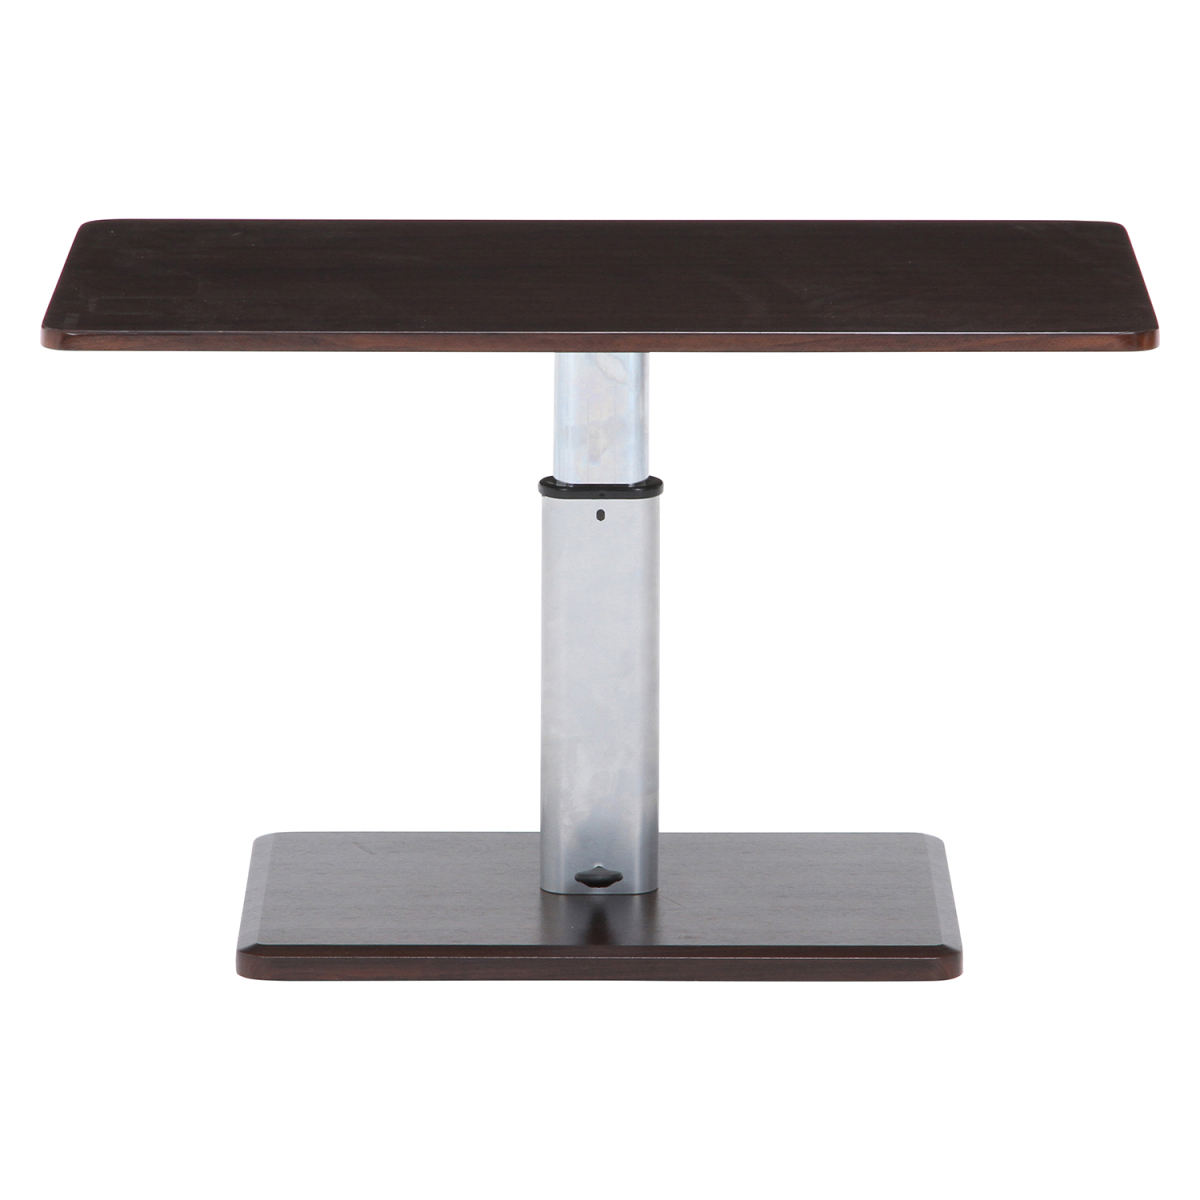  center table top and bottom flexible width 90cm Brown [ new goods ][ free shipping ]( Hokkaido Okinawa remote island postage separately )